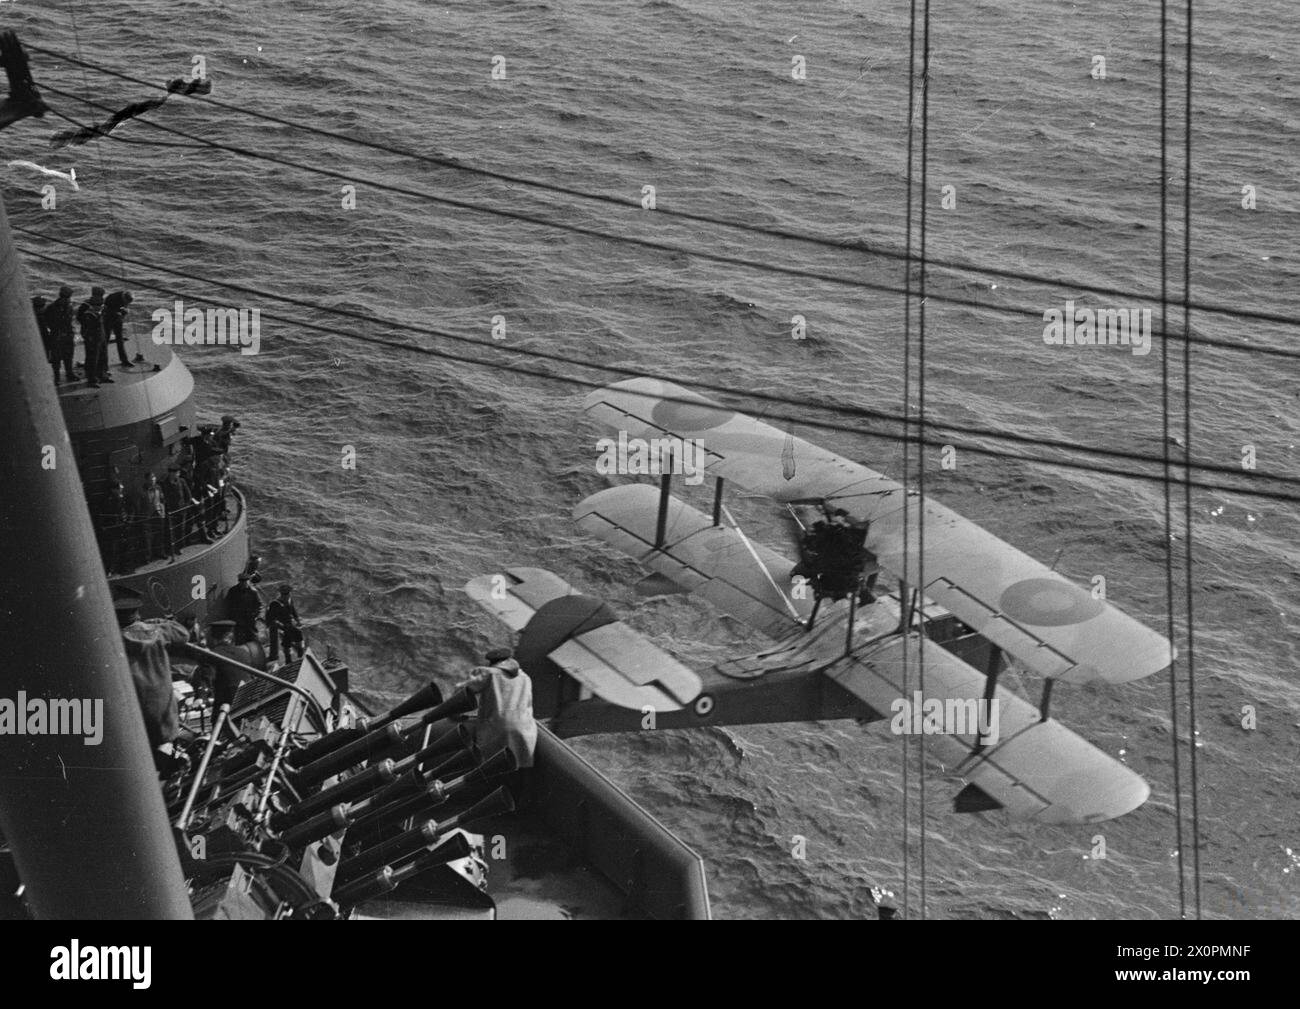 ON BOARD THE BATTLESHIP HMS PRINCE OF WALES. 1941. - A Supermarine Walrus aircraft being catapulted from HMS PRINCE OF WALES Stock Photo